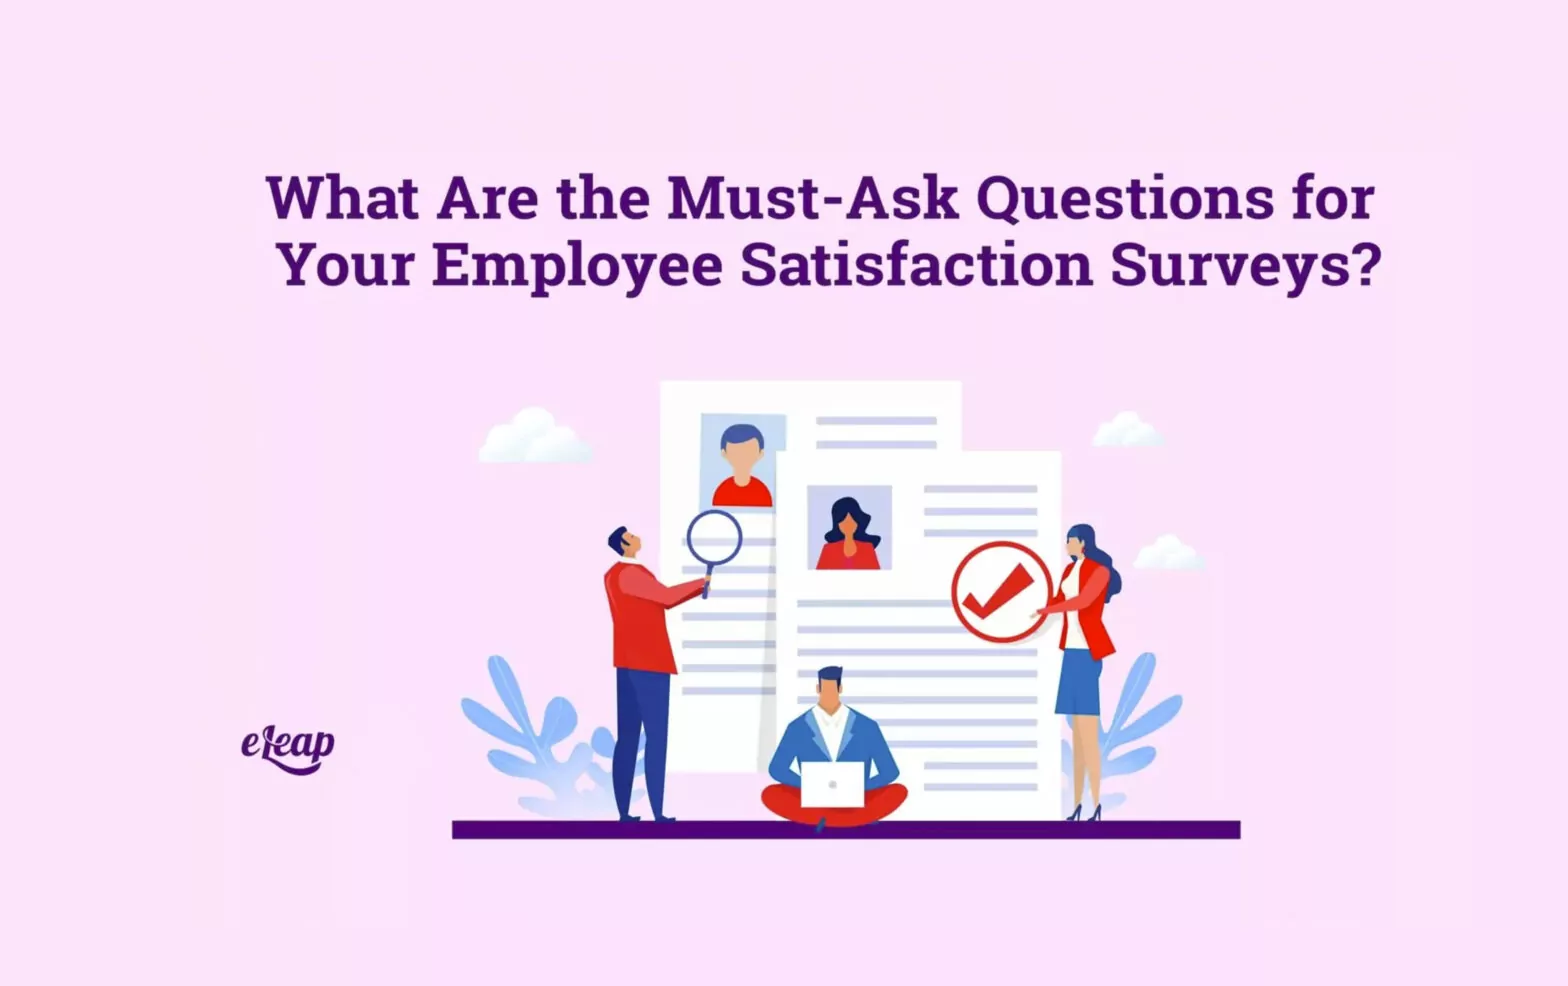 What Are the Must-Ask Questions for Your Employee Satisfaction Surveys?